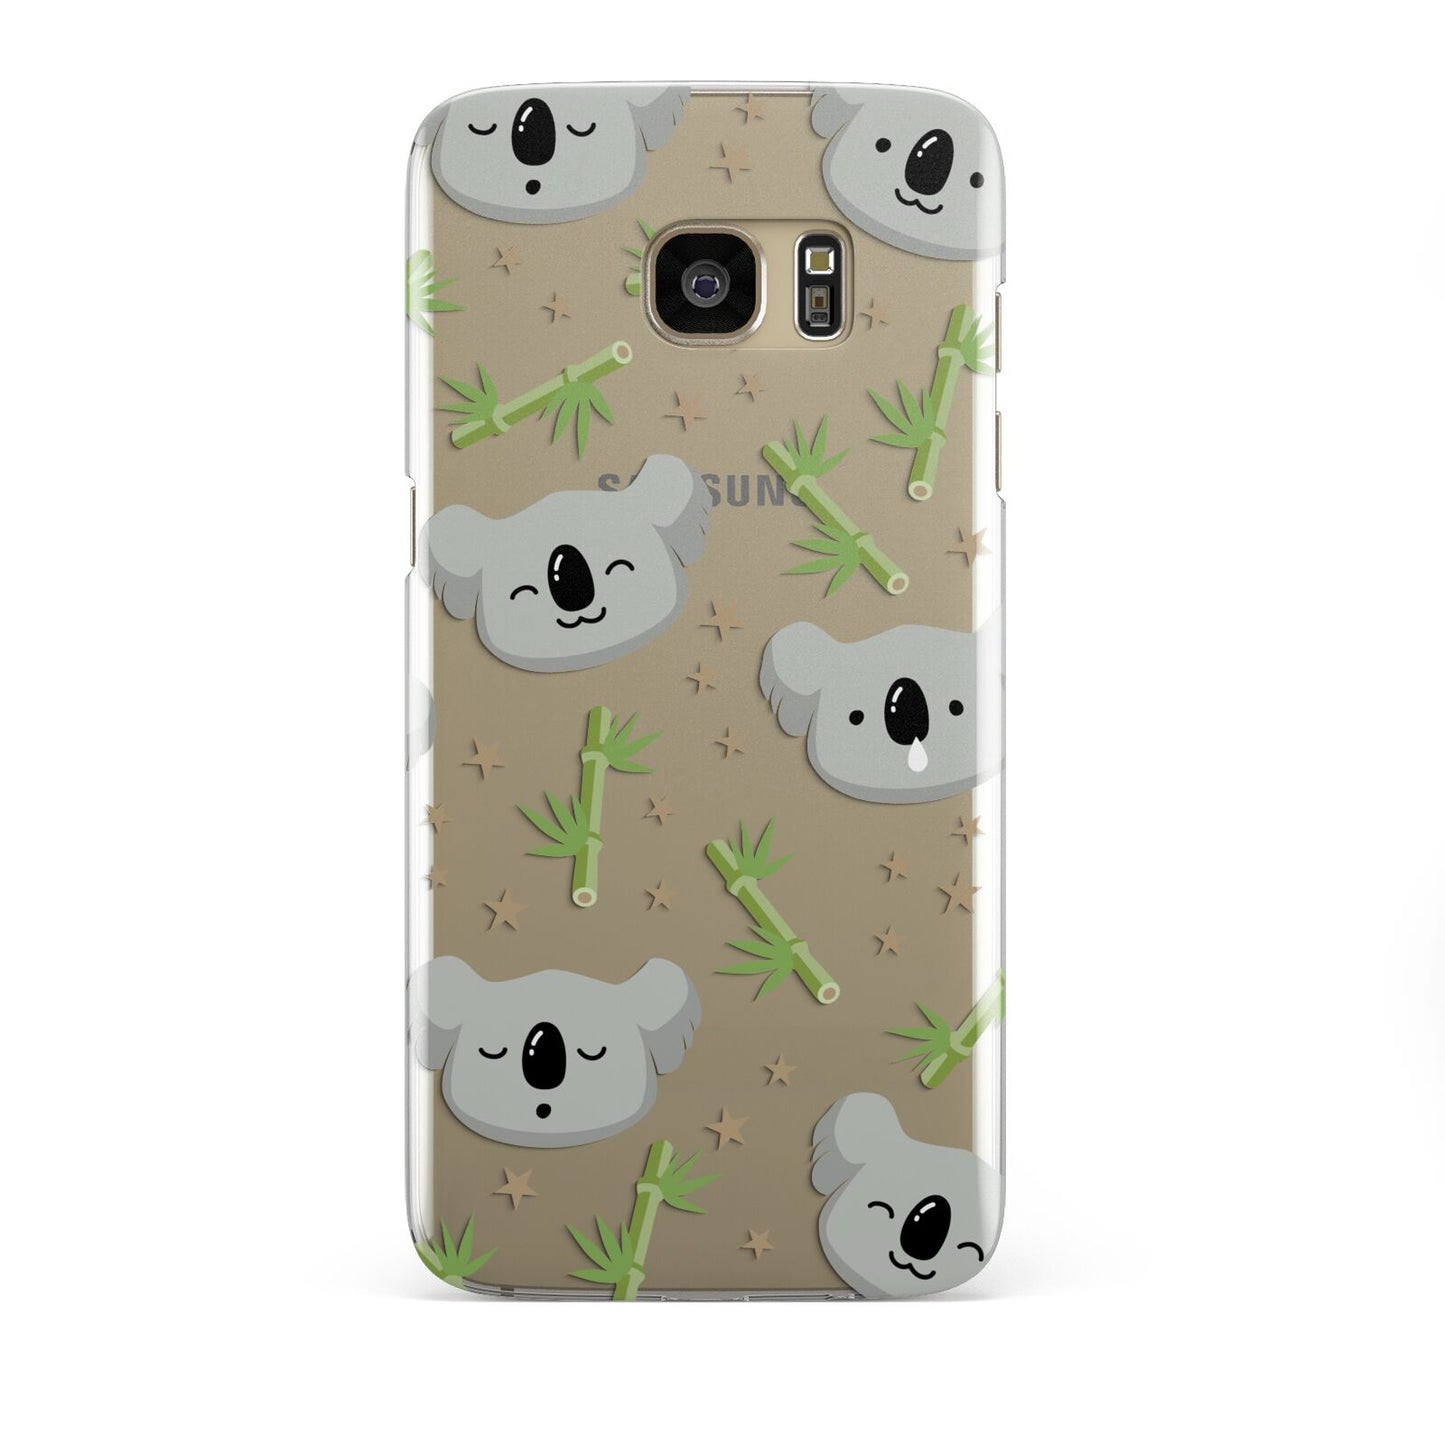 Koala Faces with Transparent Background Samsung Galaxy S7 Edge Case